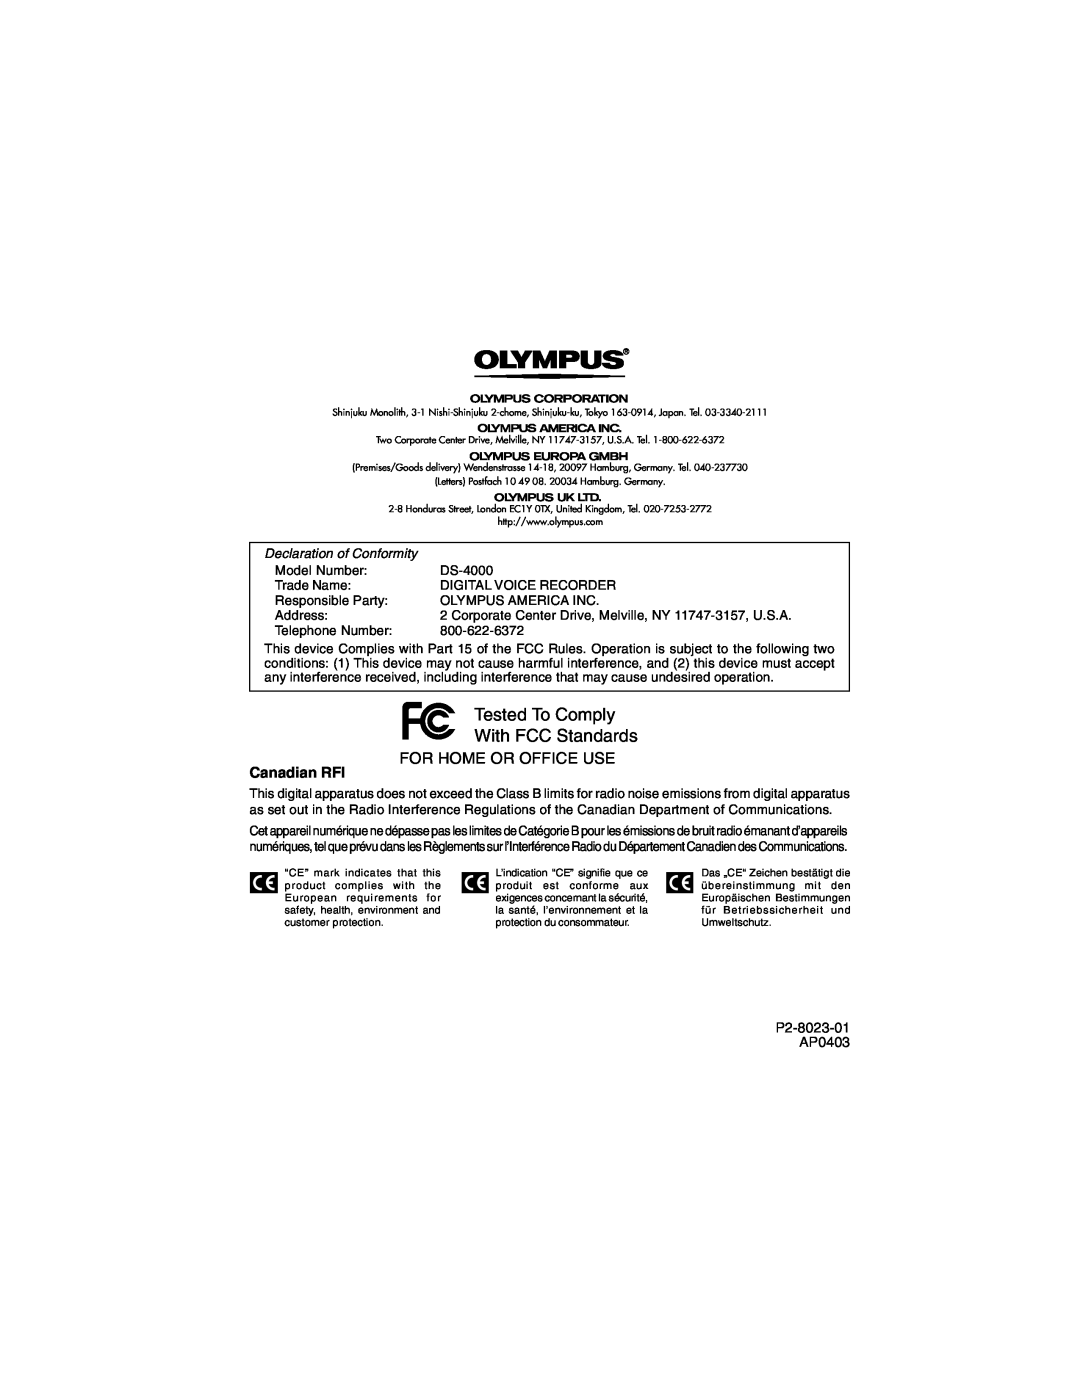 Olympus DS-4000 manual Tested To Comply With FCC Standards, Declaration of Conformity, Model Number, Trade Name, Address 